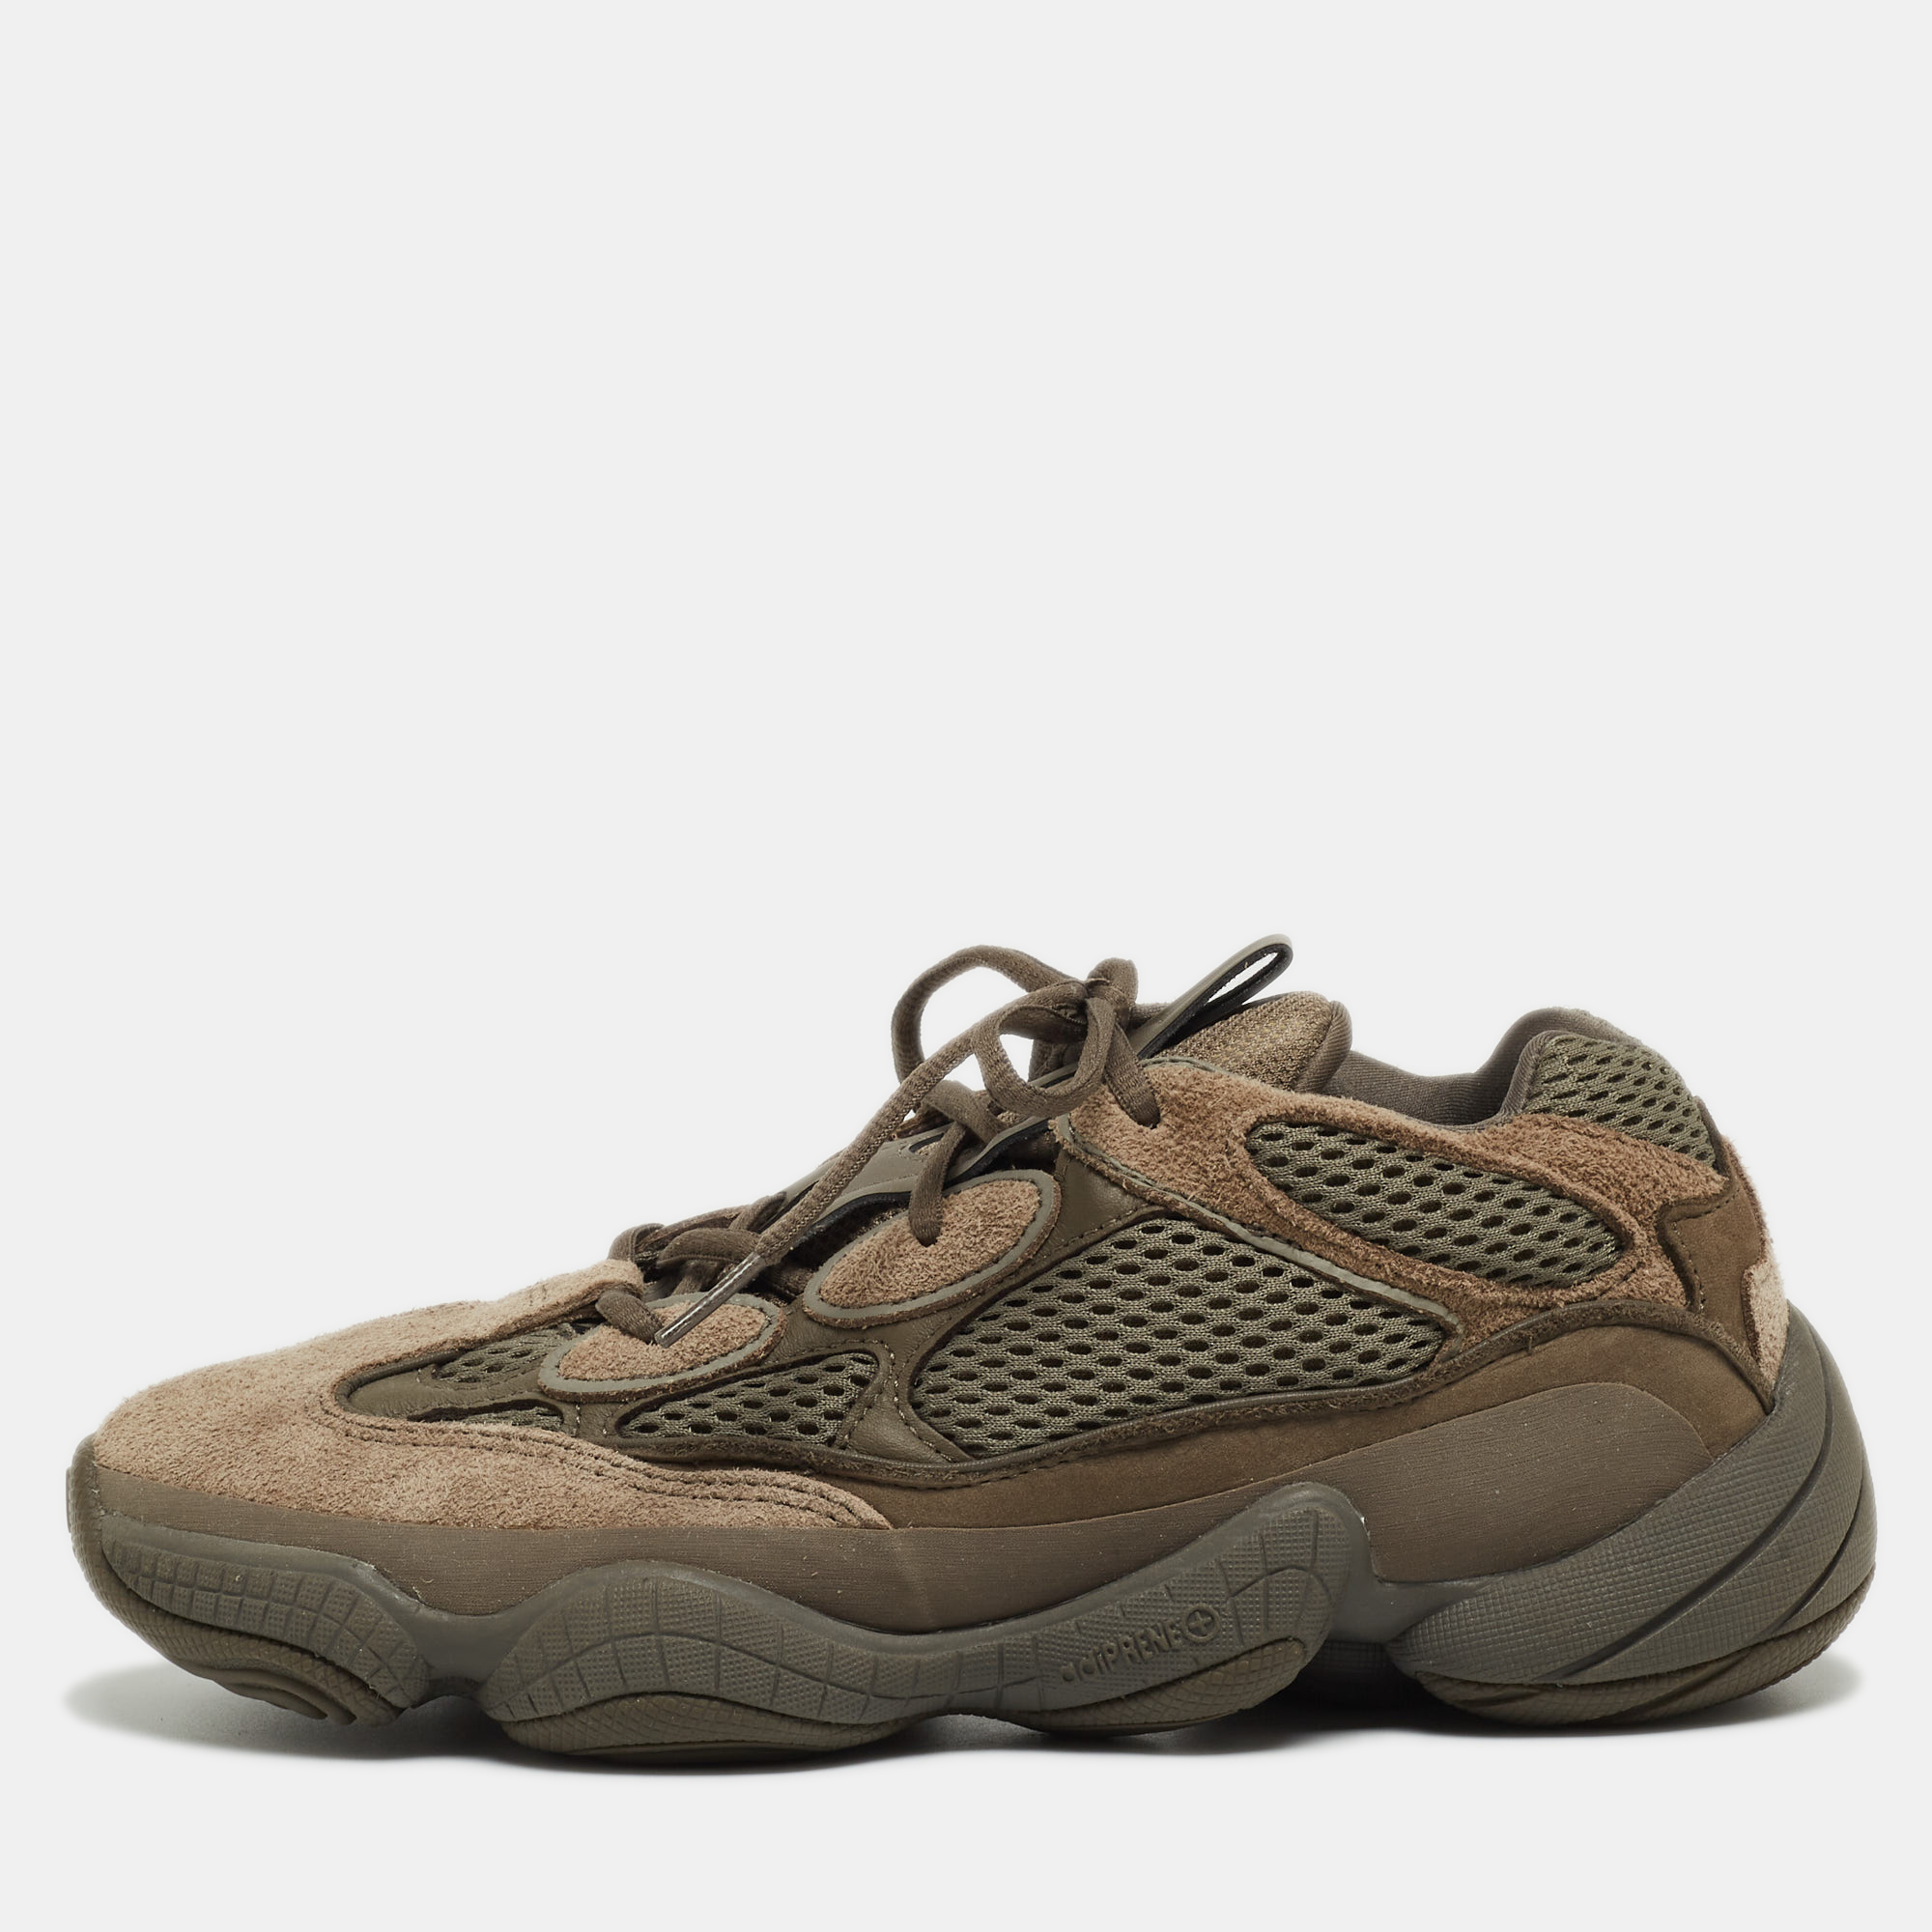 Pre-owned Yeezy X Adidas Two Tone Mesh And Suede Yeezy 500 Clay Brown Sneakers Size 41 1/3